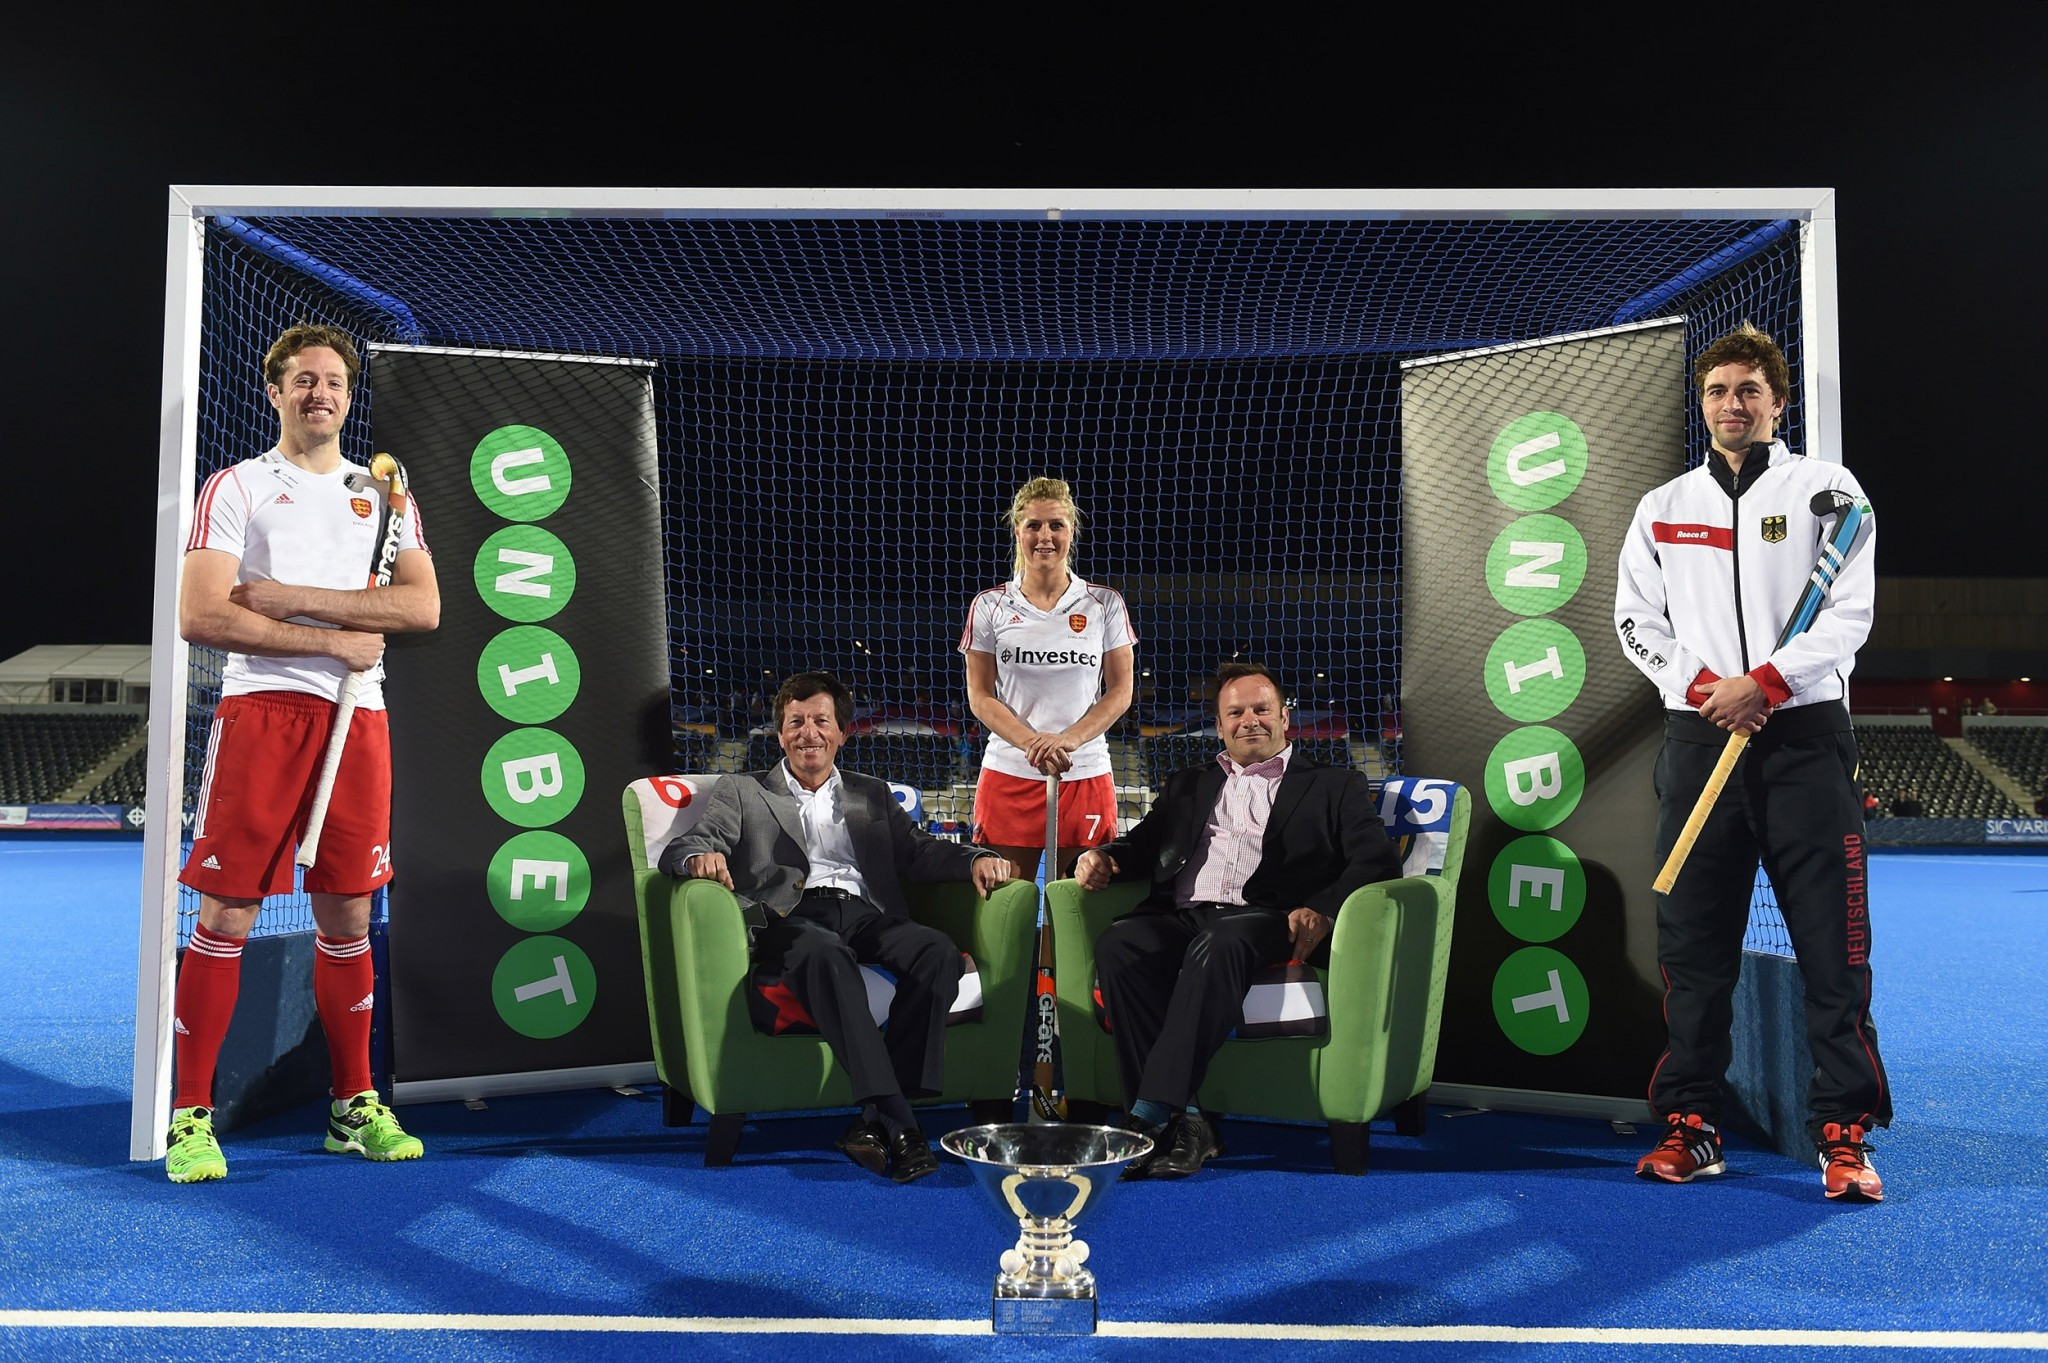 Unibet announced as title sponsor for 2015 EuroHockey Championships